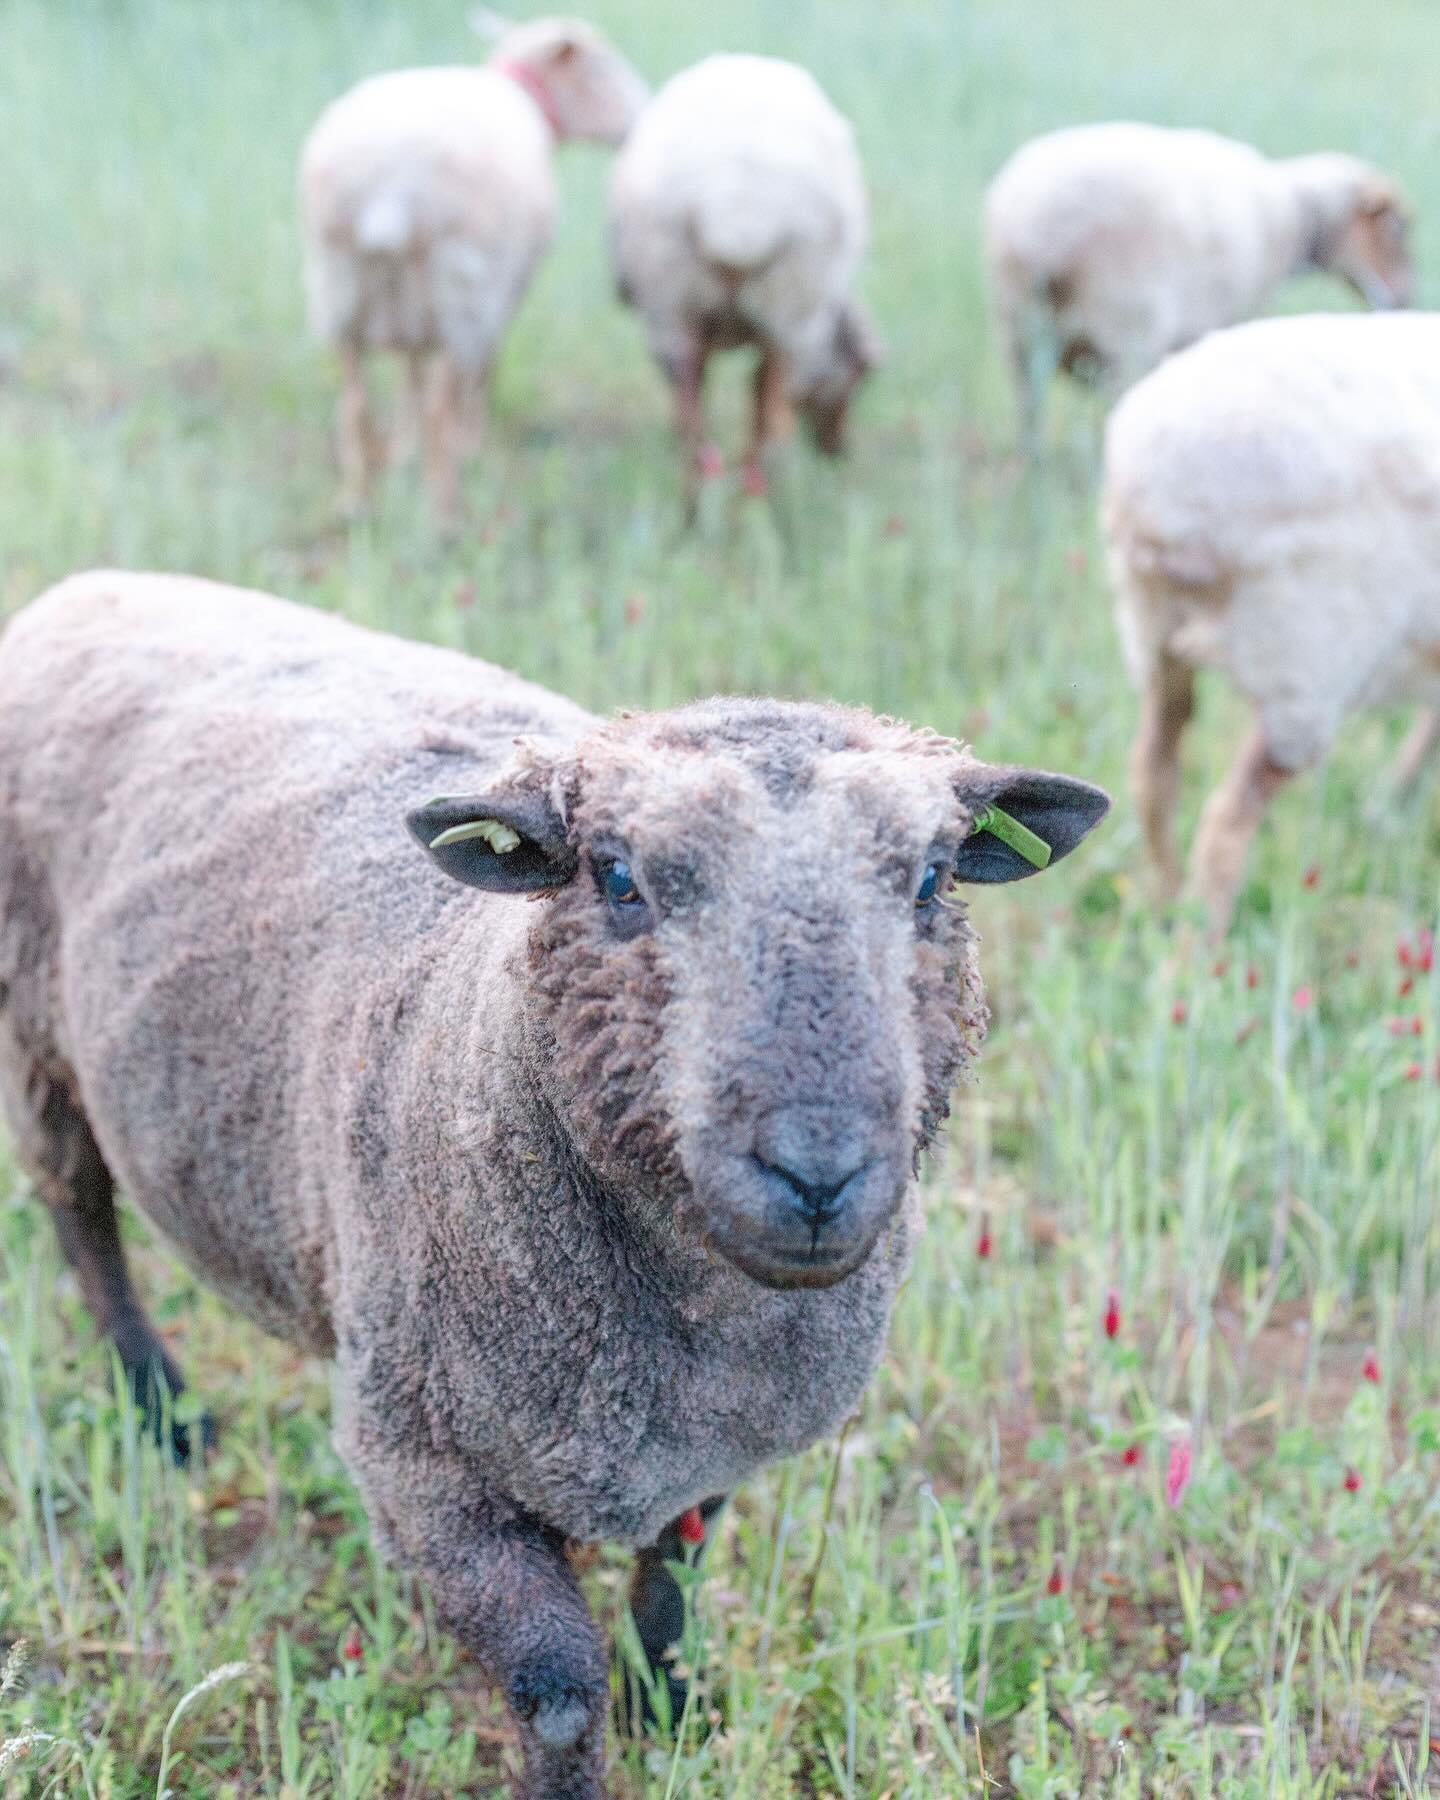 🌾 Our beloved heritage breed sheep! 
Dr. Pepper, the charming Babydoll Ram from England, a true &ldquo;love bug&rdquo; who adores cuddles. 🇬🇧 
Fun Fact: He&rsquo;s one of a triplet!🐑 
Our Tunis sheep girls originated out of Tunisia, Africa
- Cola